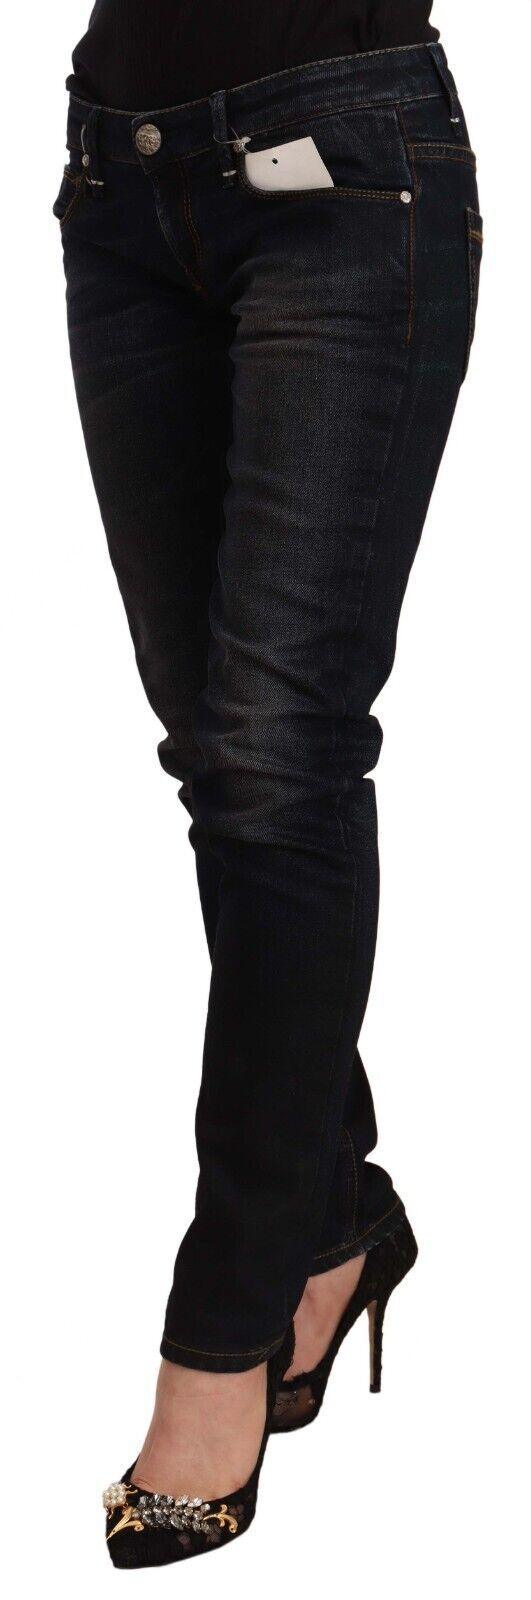 Acht Chic Black Washed Skinny Jeans for Her - PER.FASHION